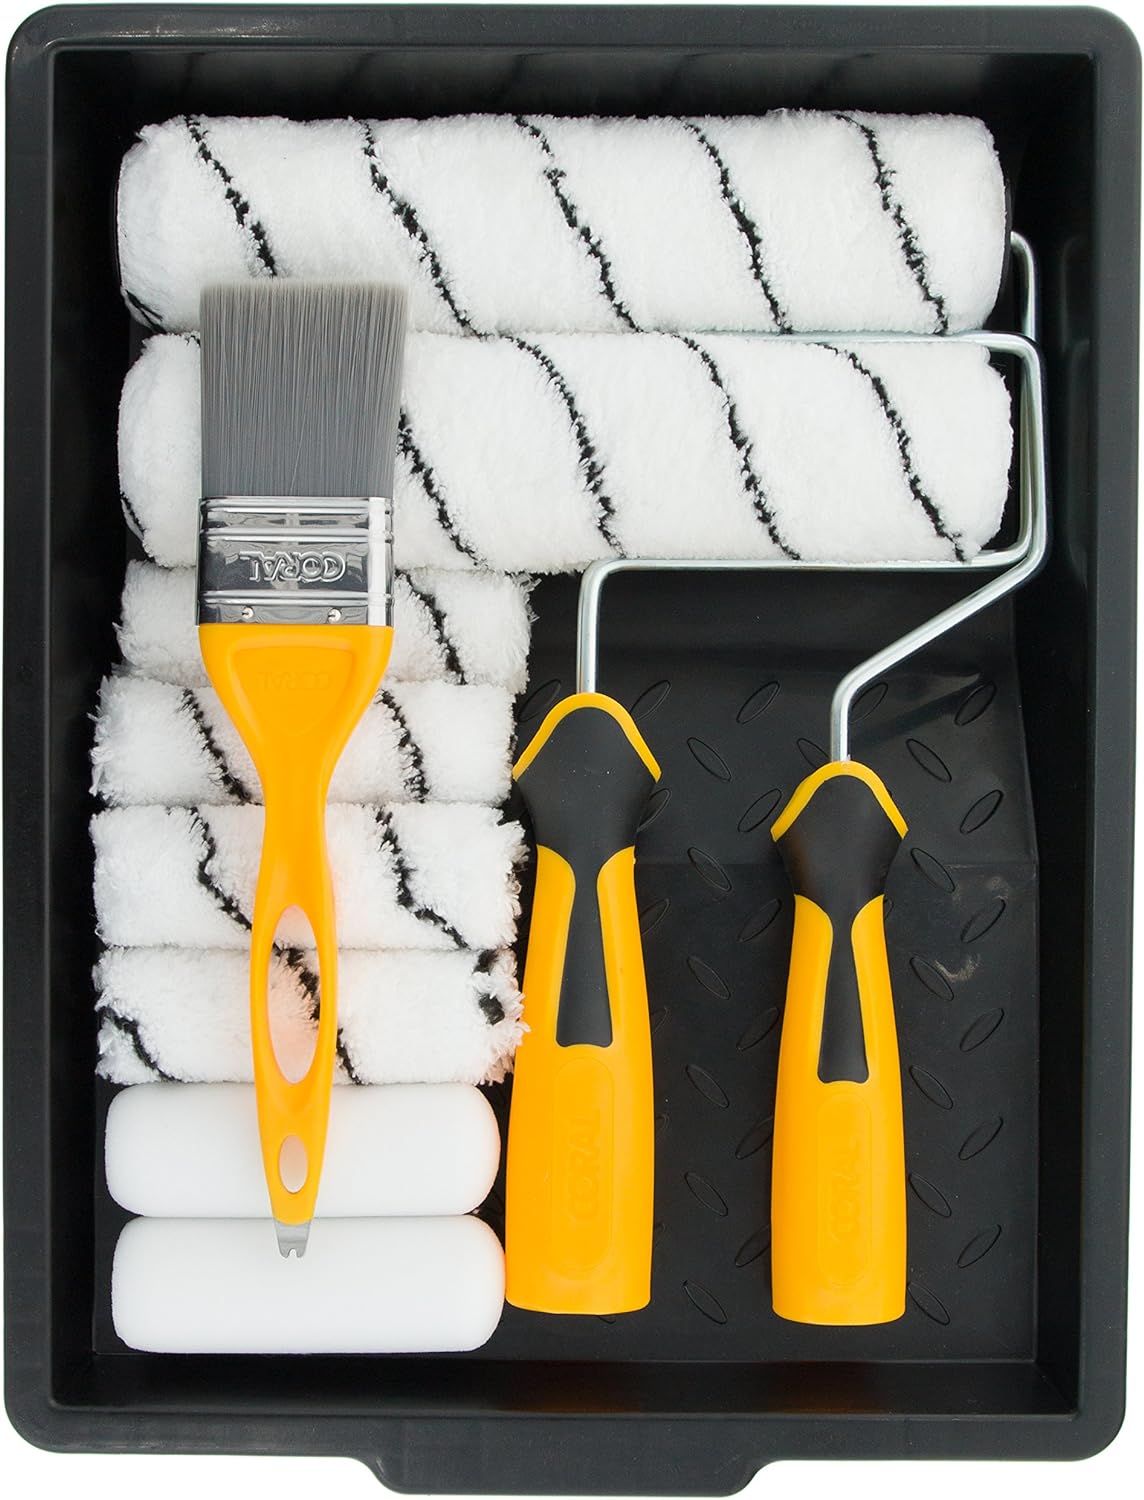 Coral 10501 Paint Kit with Headlock and Mini Roller Frame and Hybrid Brush, Set of 12 Pieces - 5018